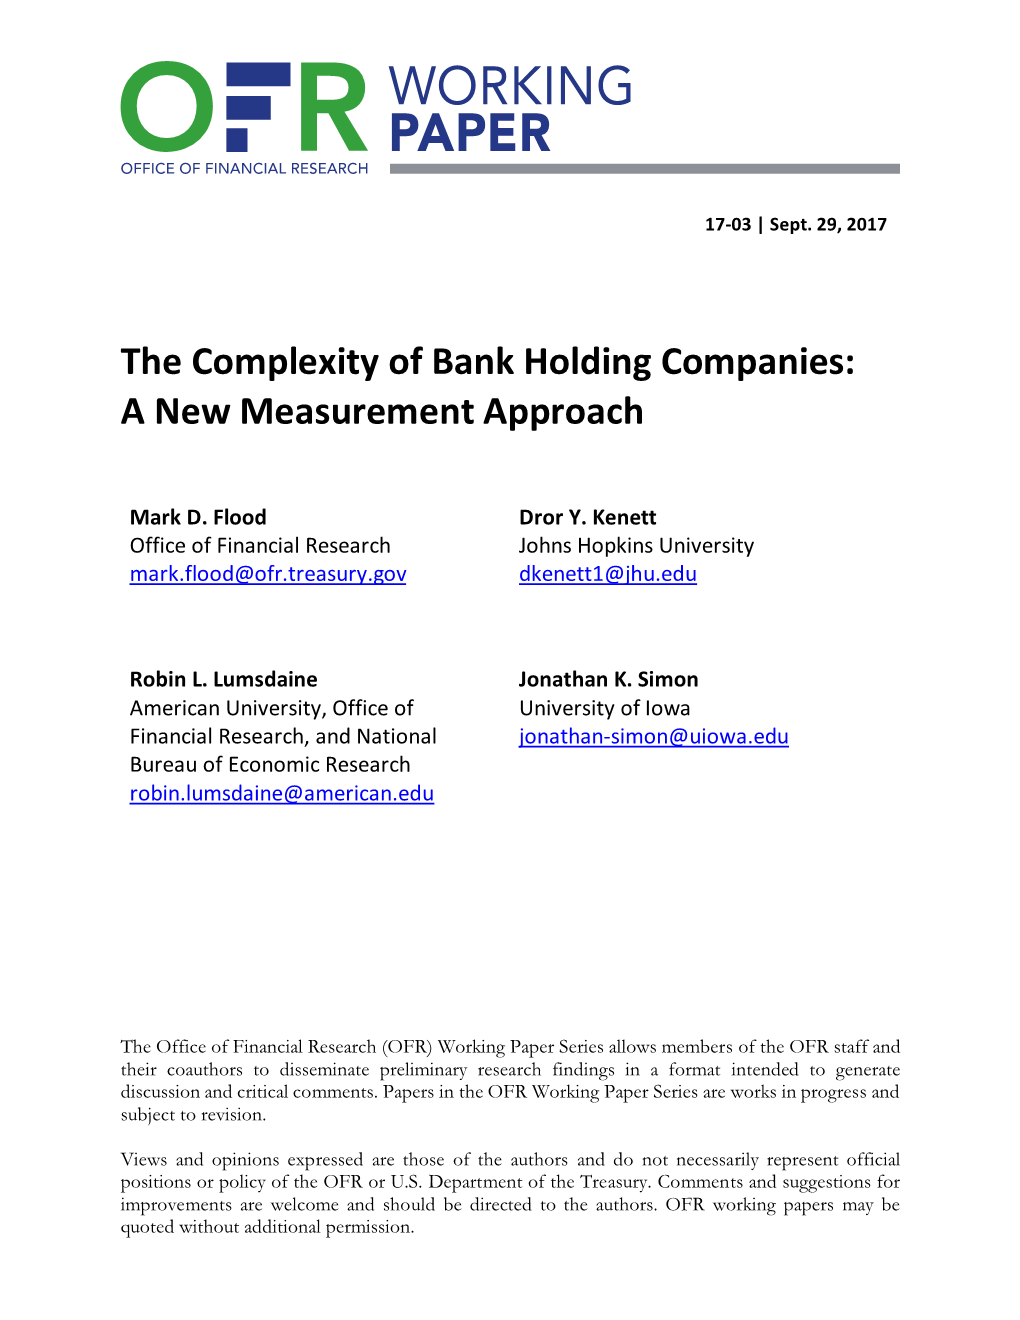 The Complexity of Bank Holding Companies: a New Measurement Approach